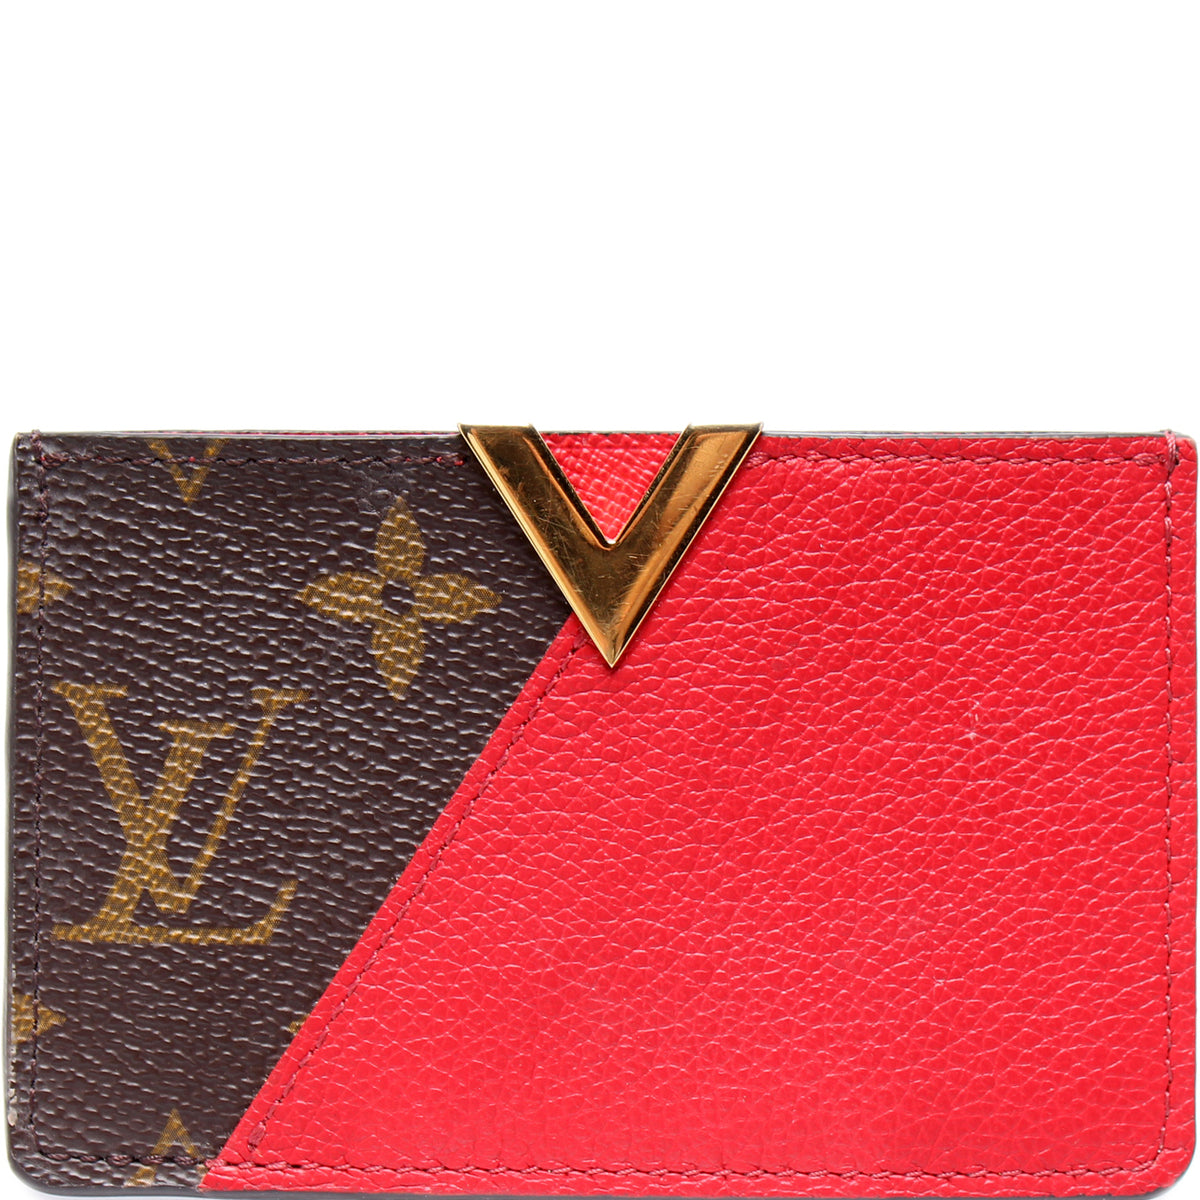 Louis Vuitton Pre-owned Women's Fabric Cardholder - Brown - One Size